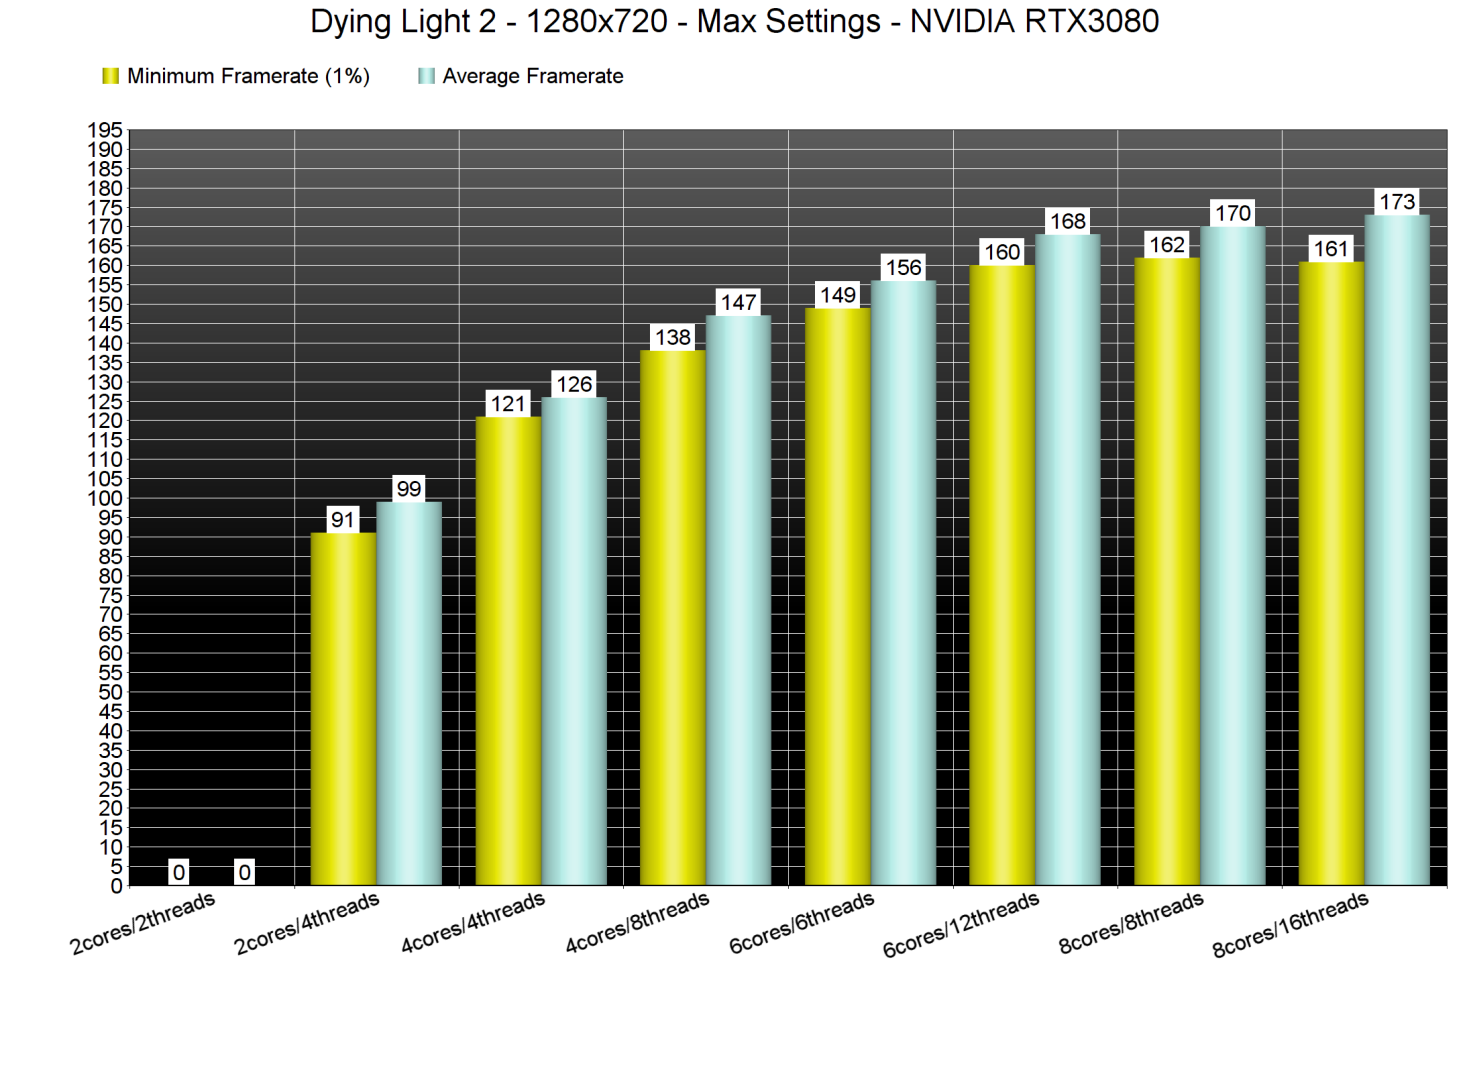 Dying Light 2 CPU benchmarks